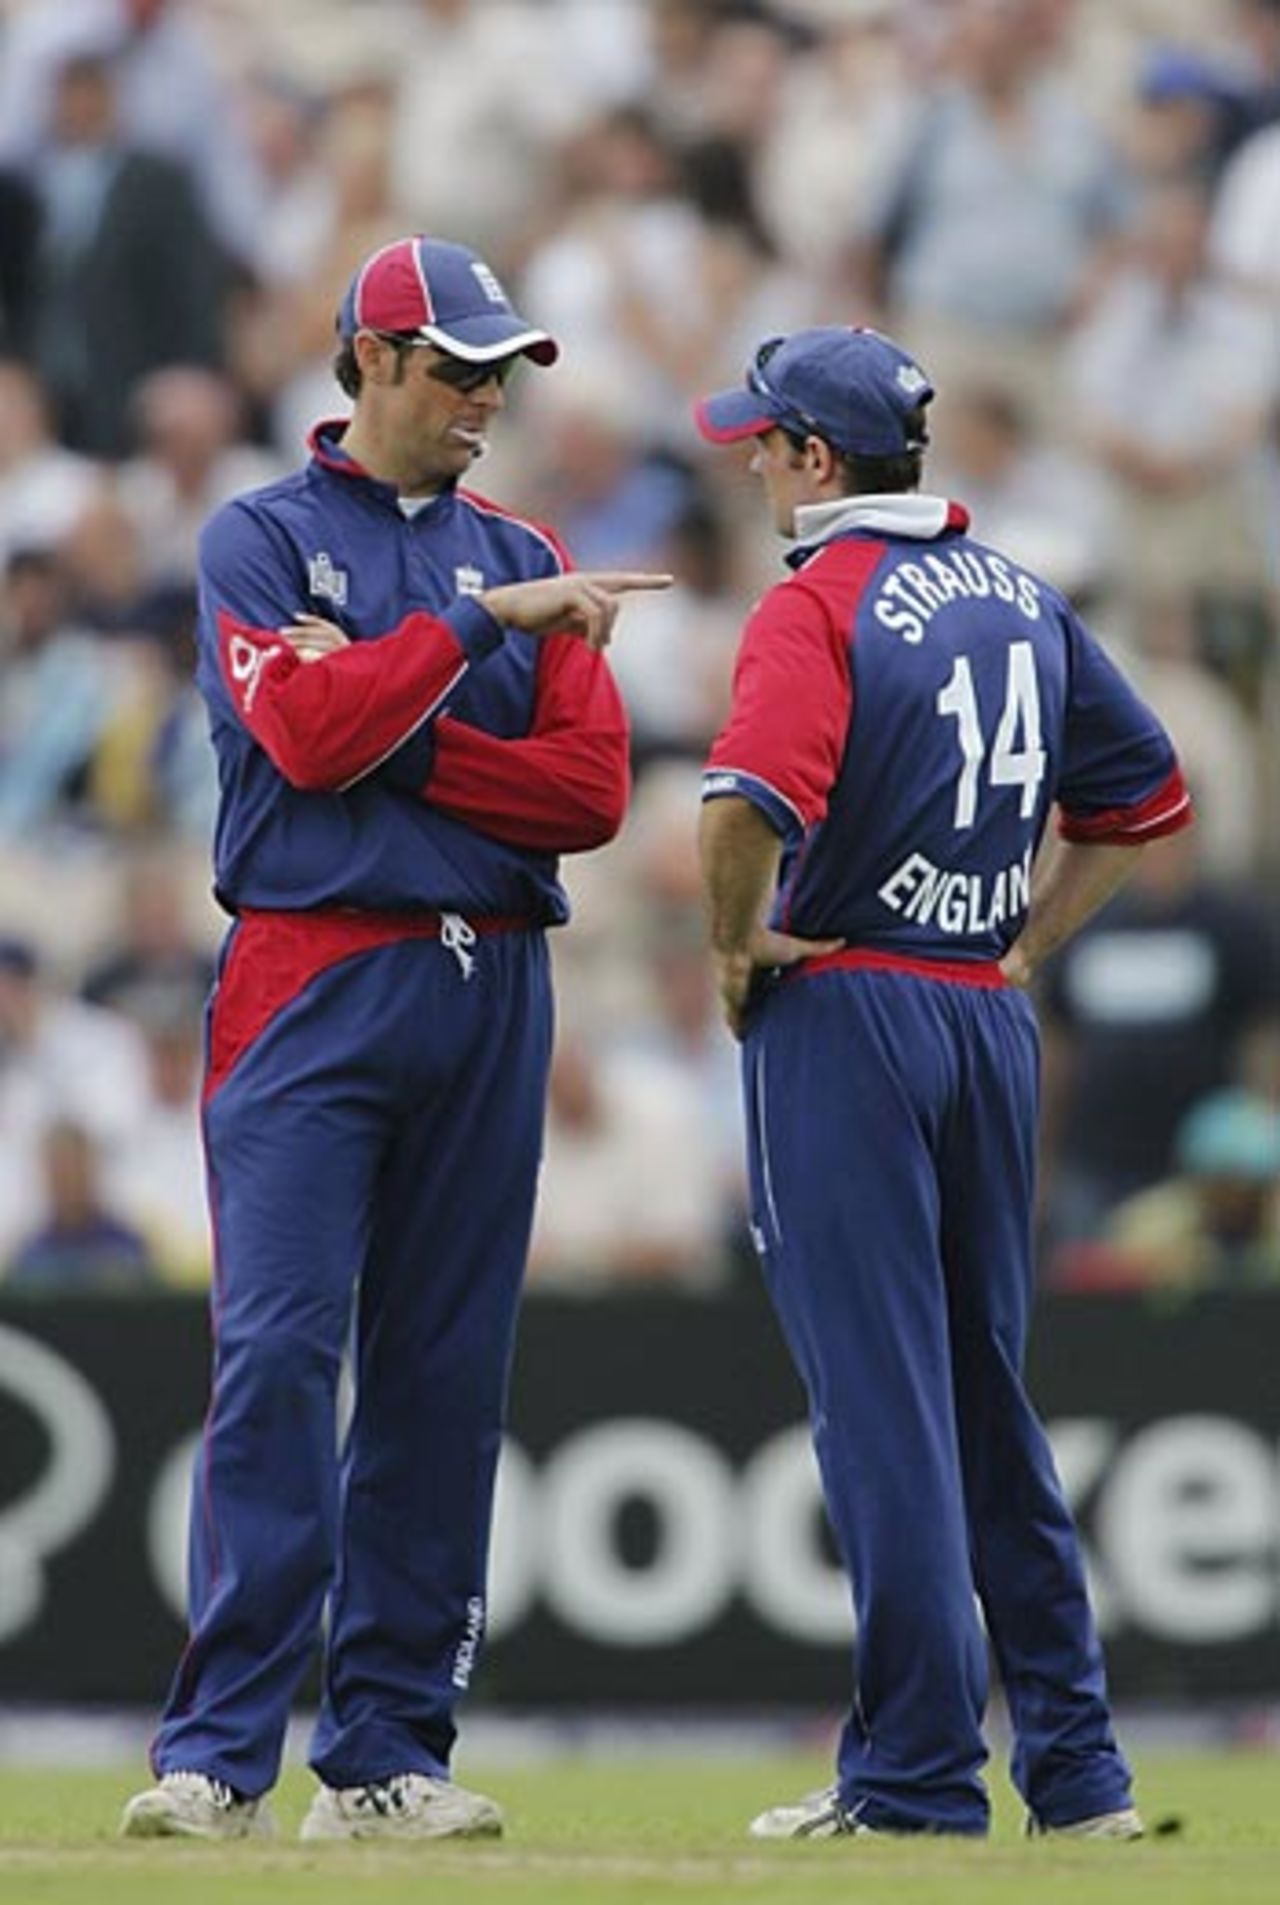 Marcus Trescothick lends his captain, Andrew Strauss, a word of advice, England v Sri Lanka, 4th ODI, Old Trafford, June 28, 2006